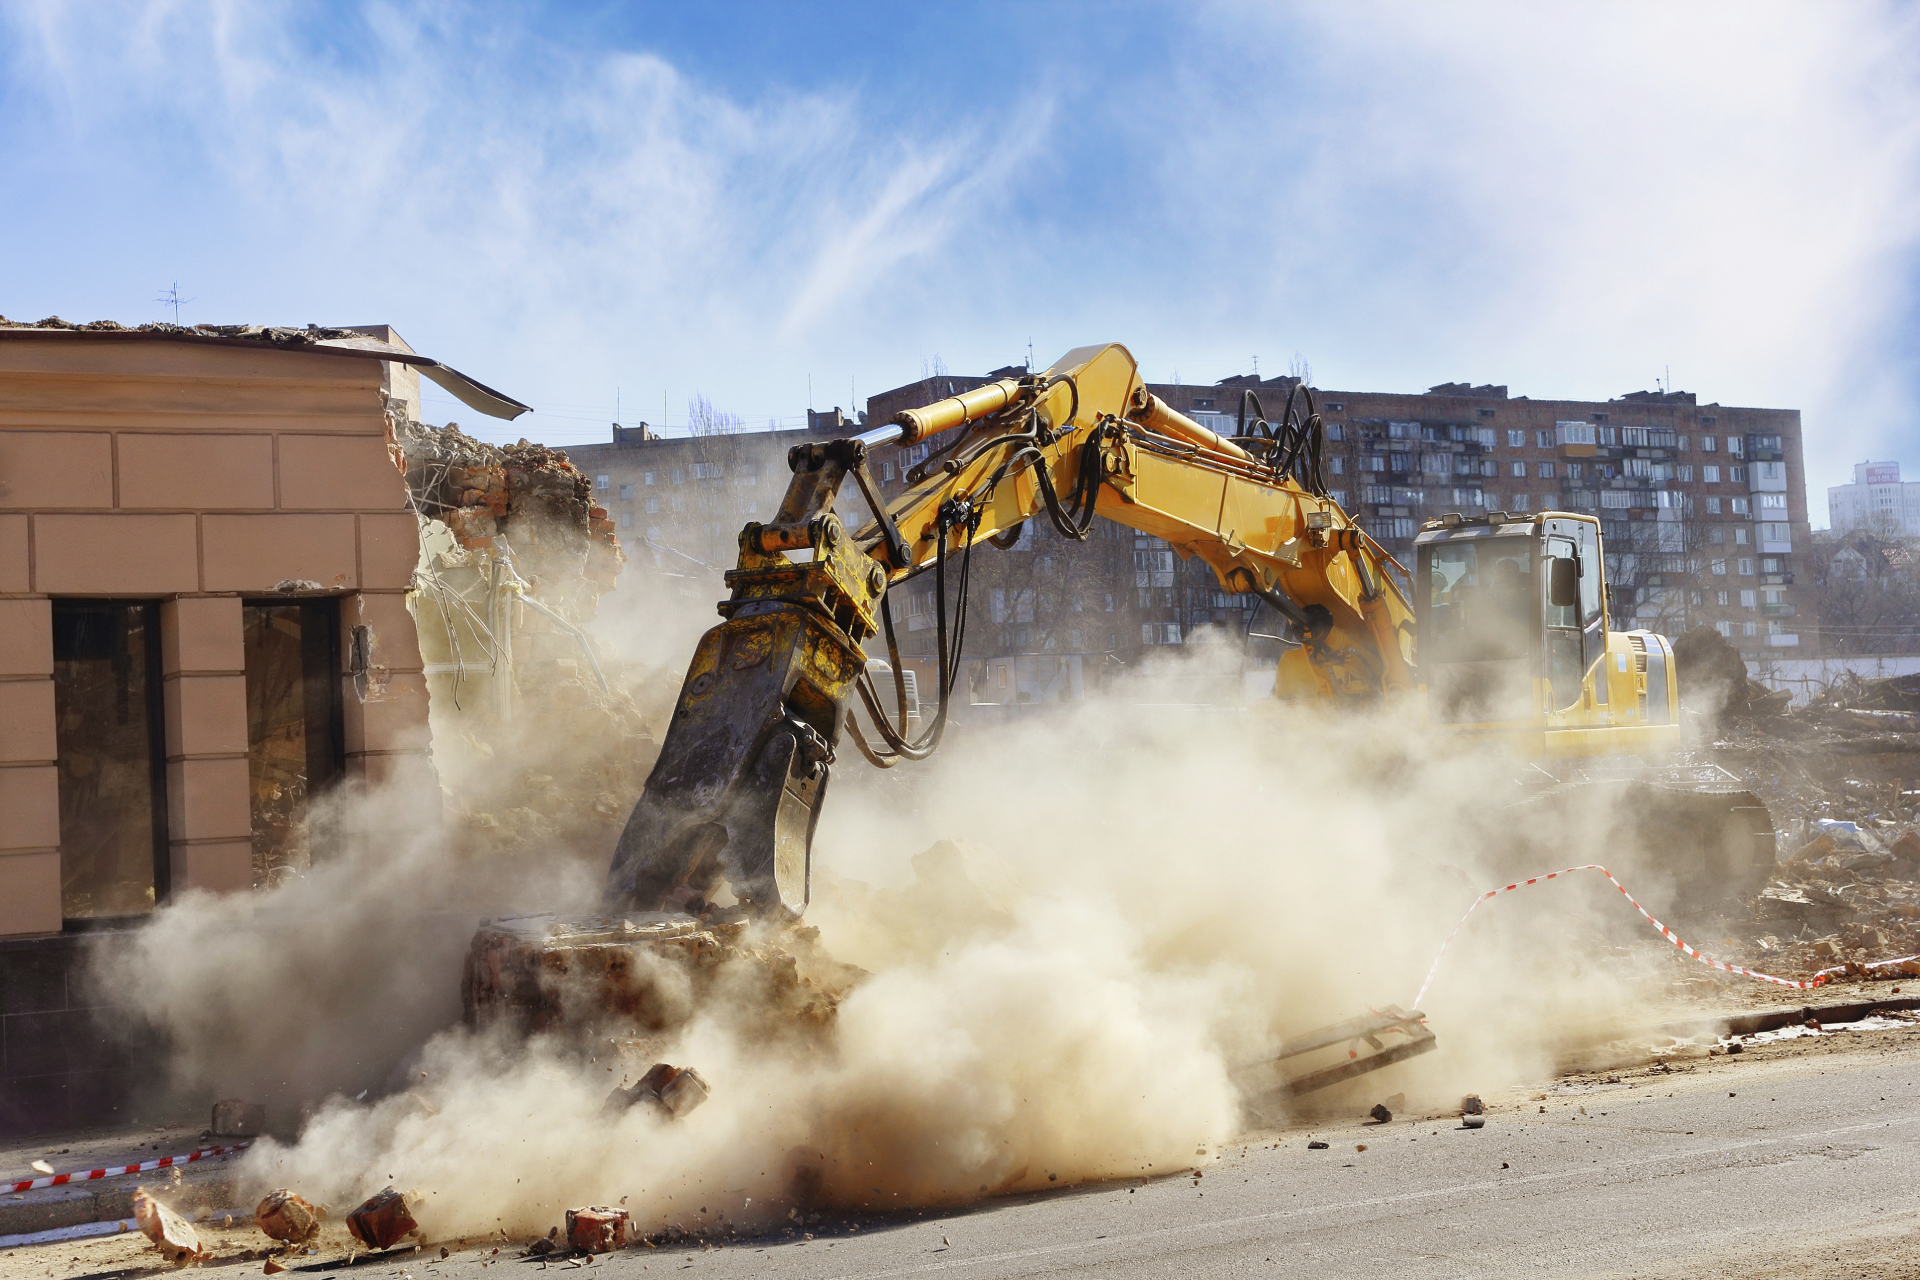 The Demolition Company: From Start To Finish